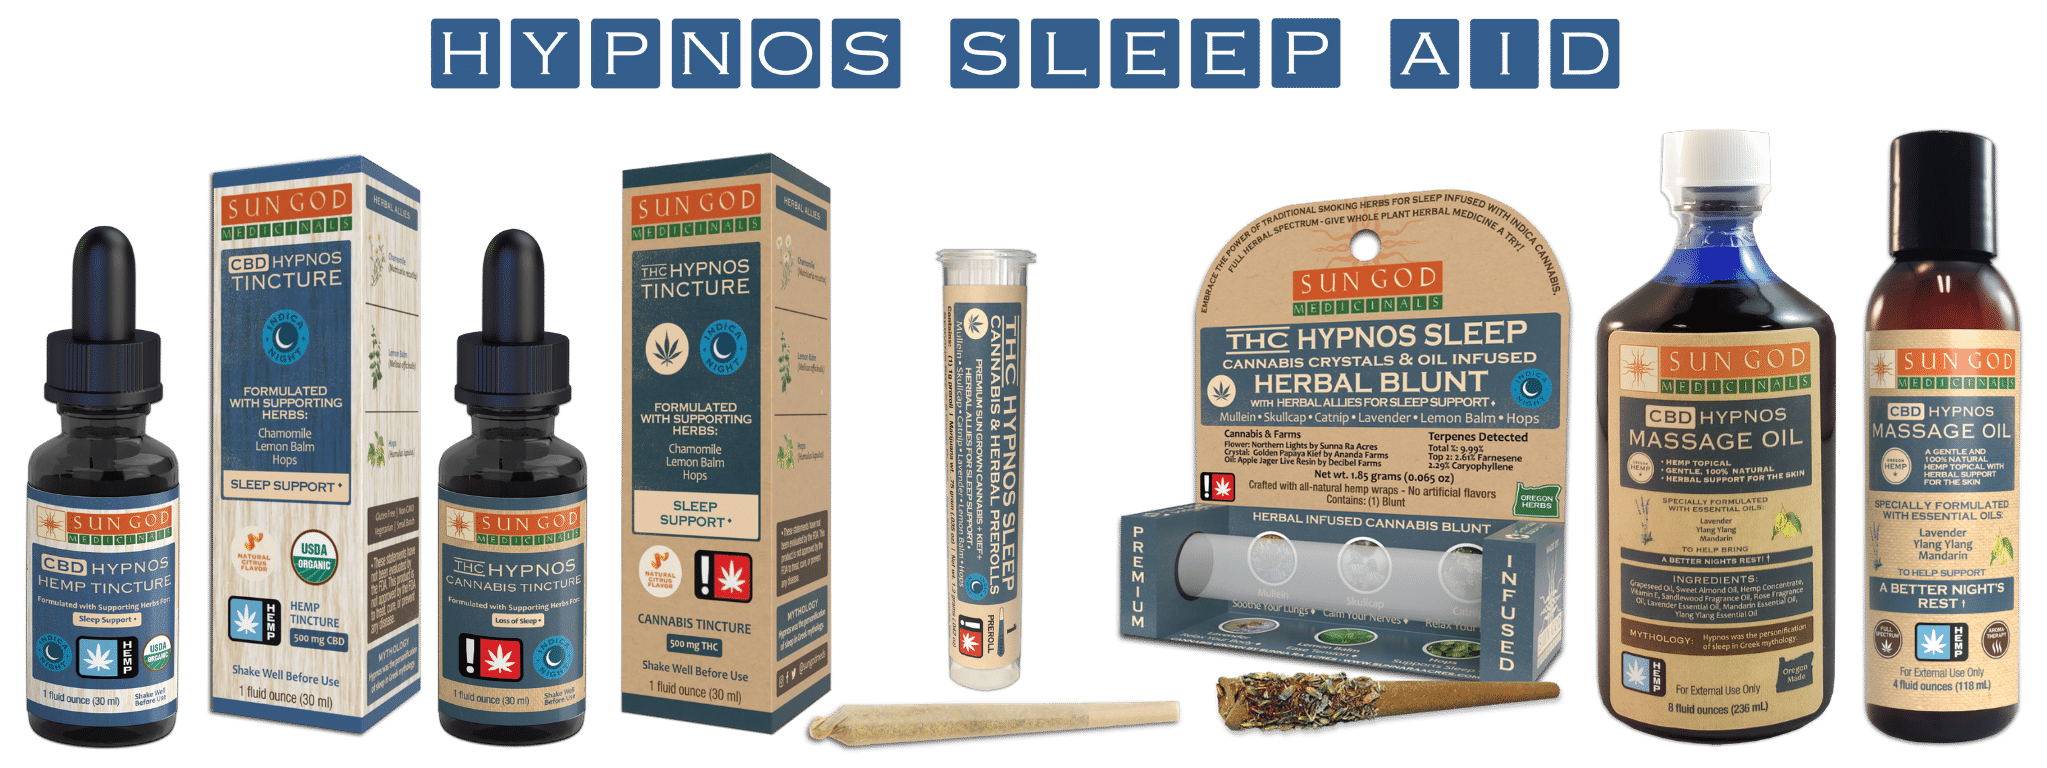 Herbal Products For Sleep Support - by Sun God Medicinals